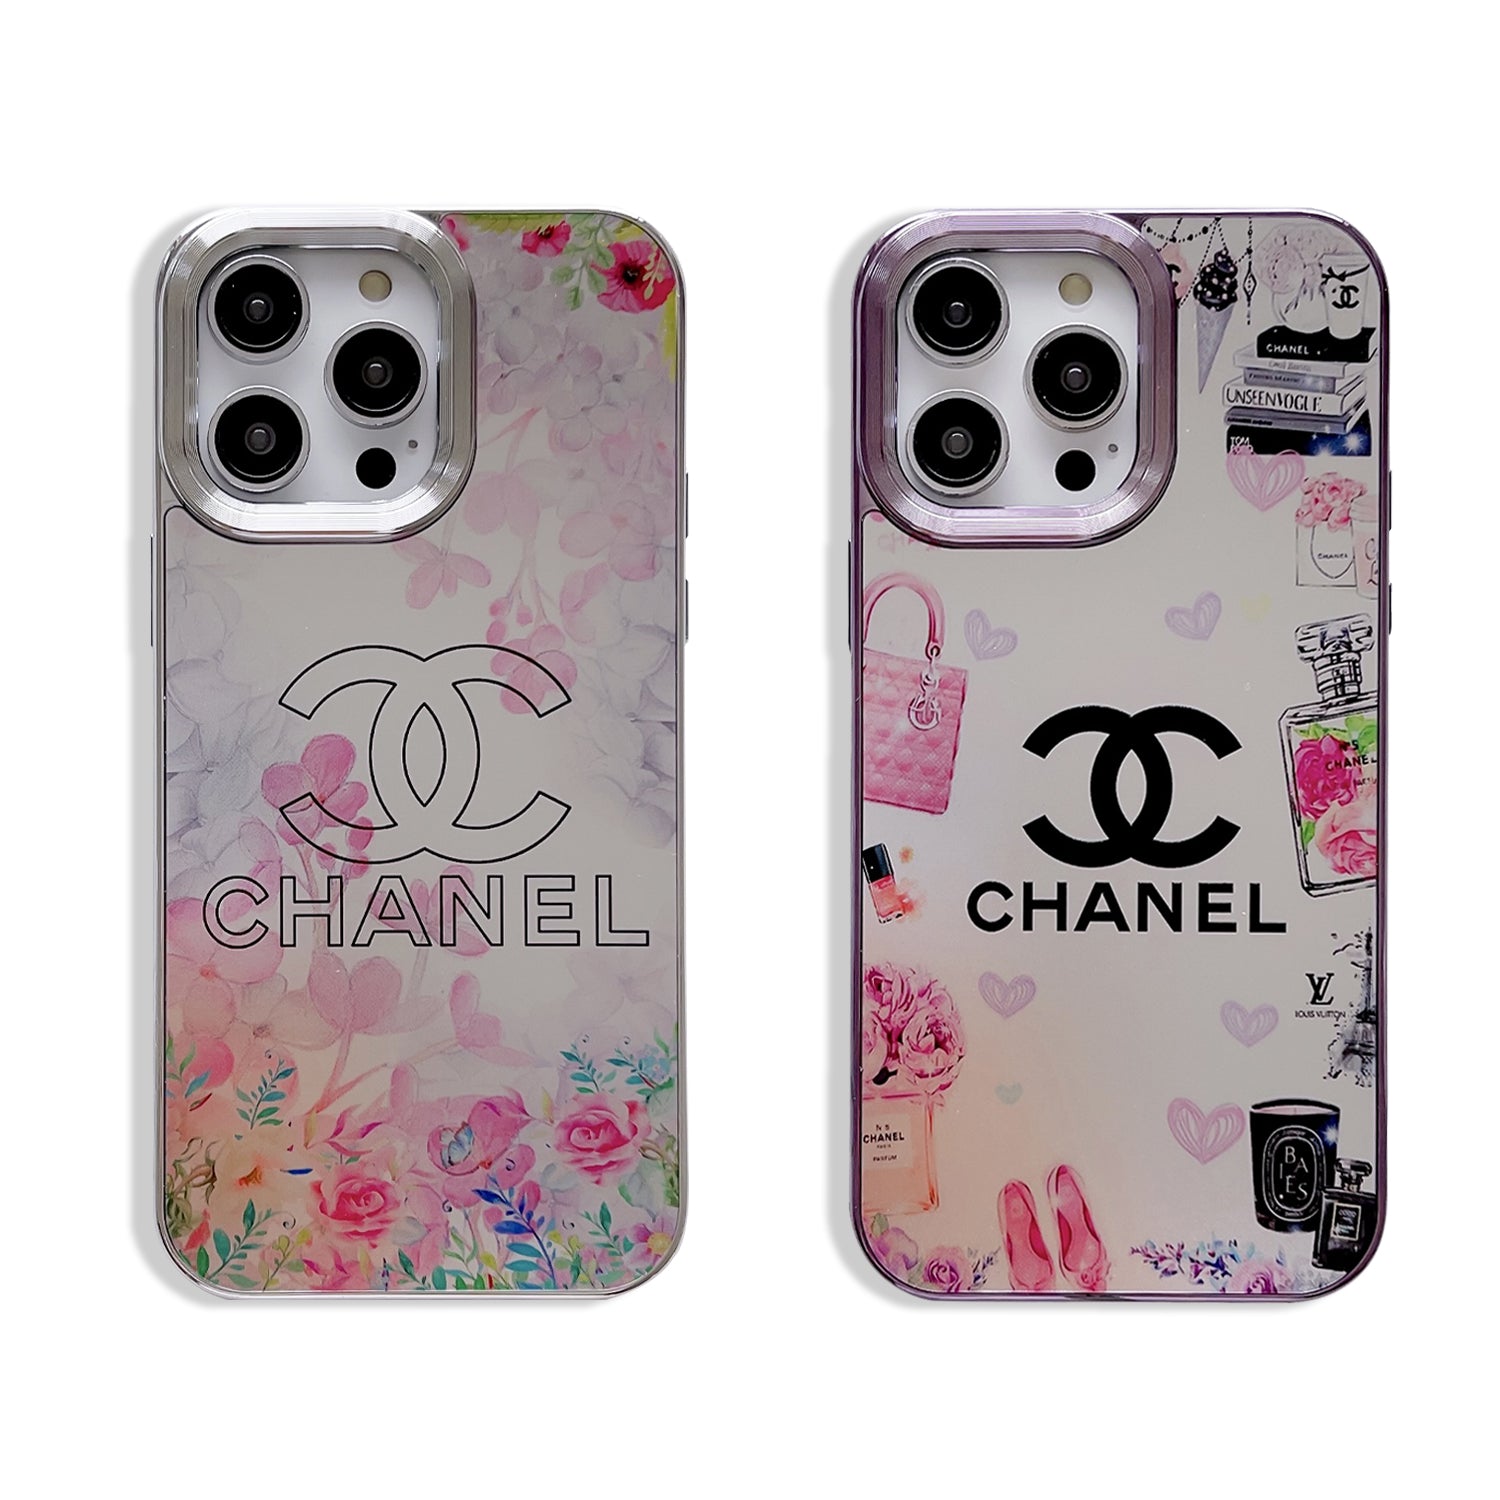 Chanel iPhone case A41  A42